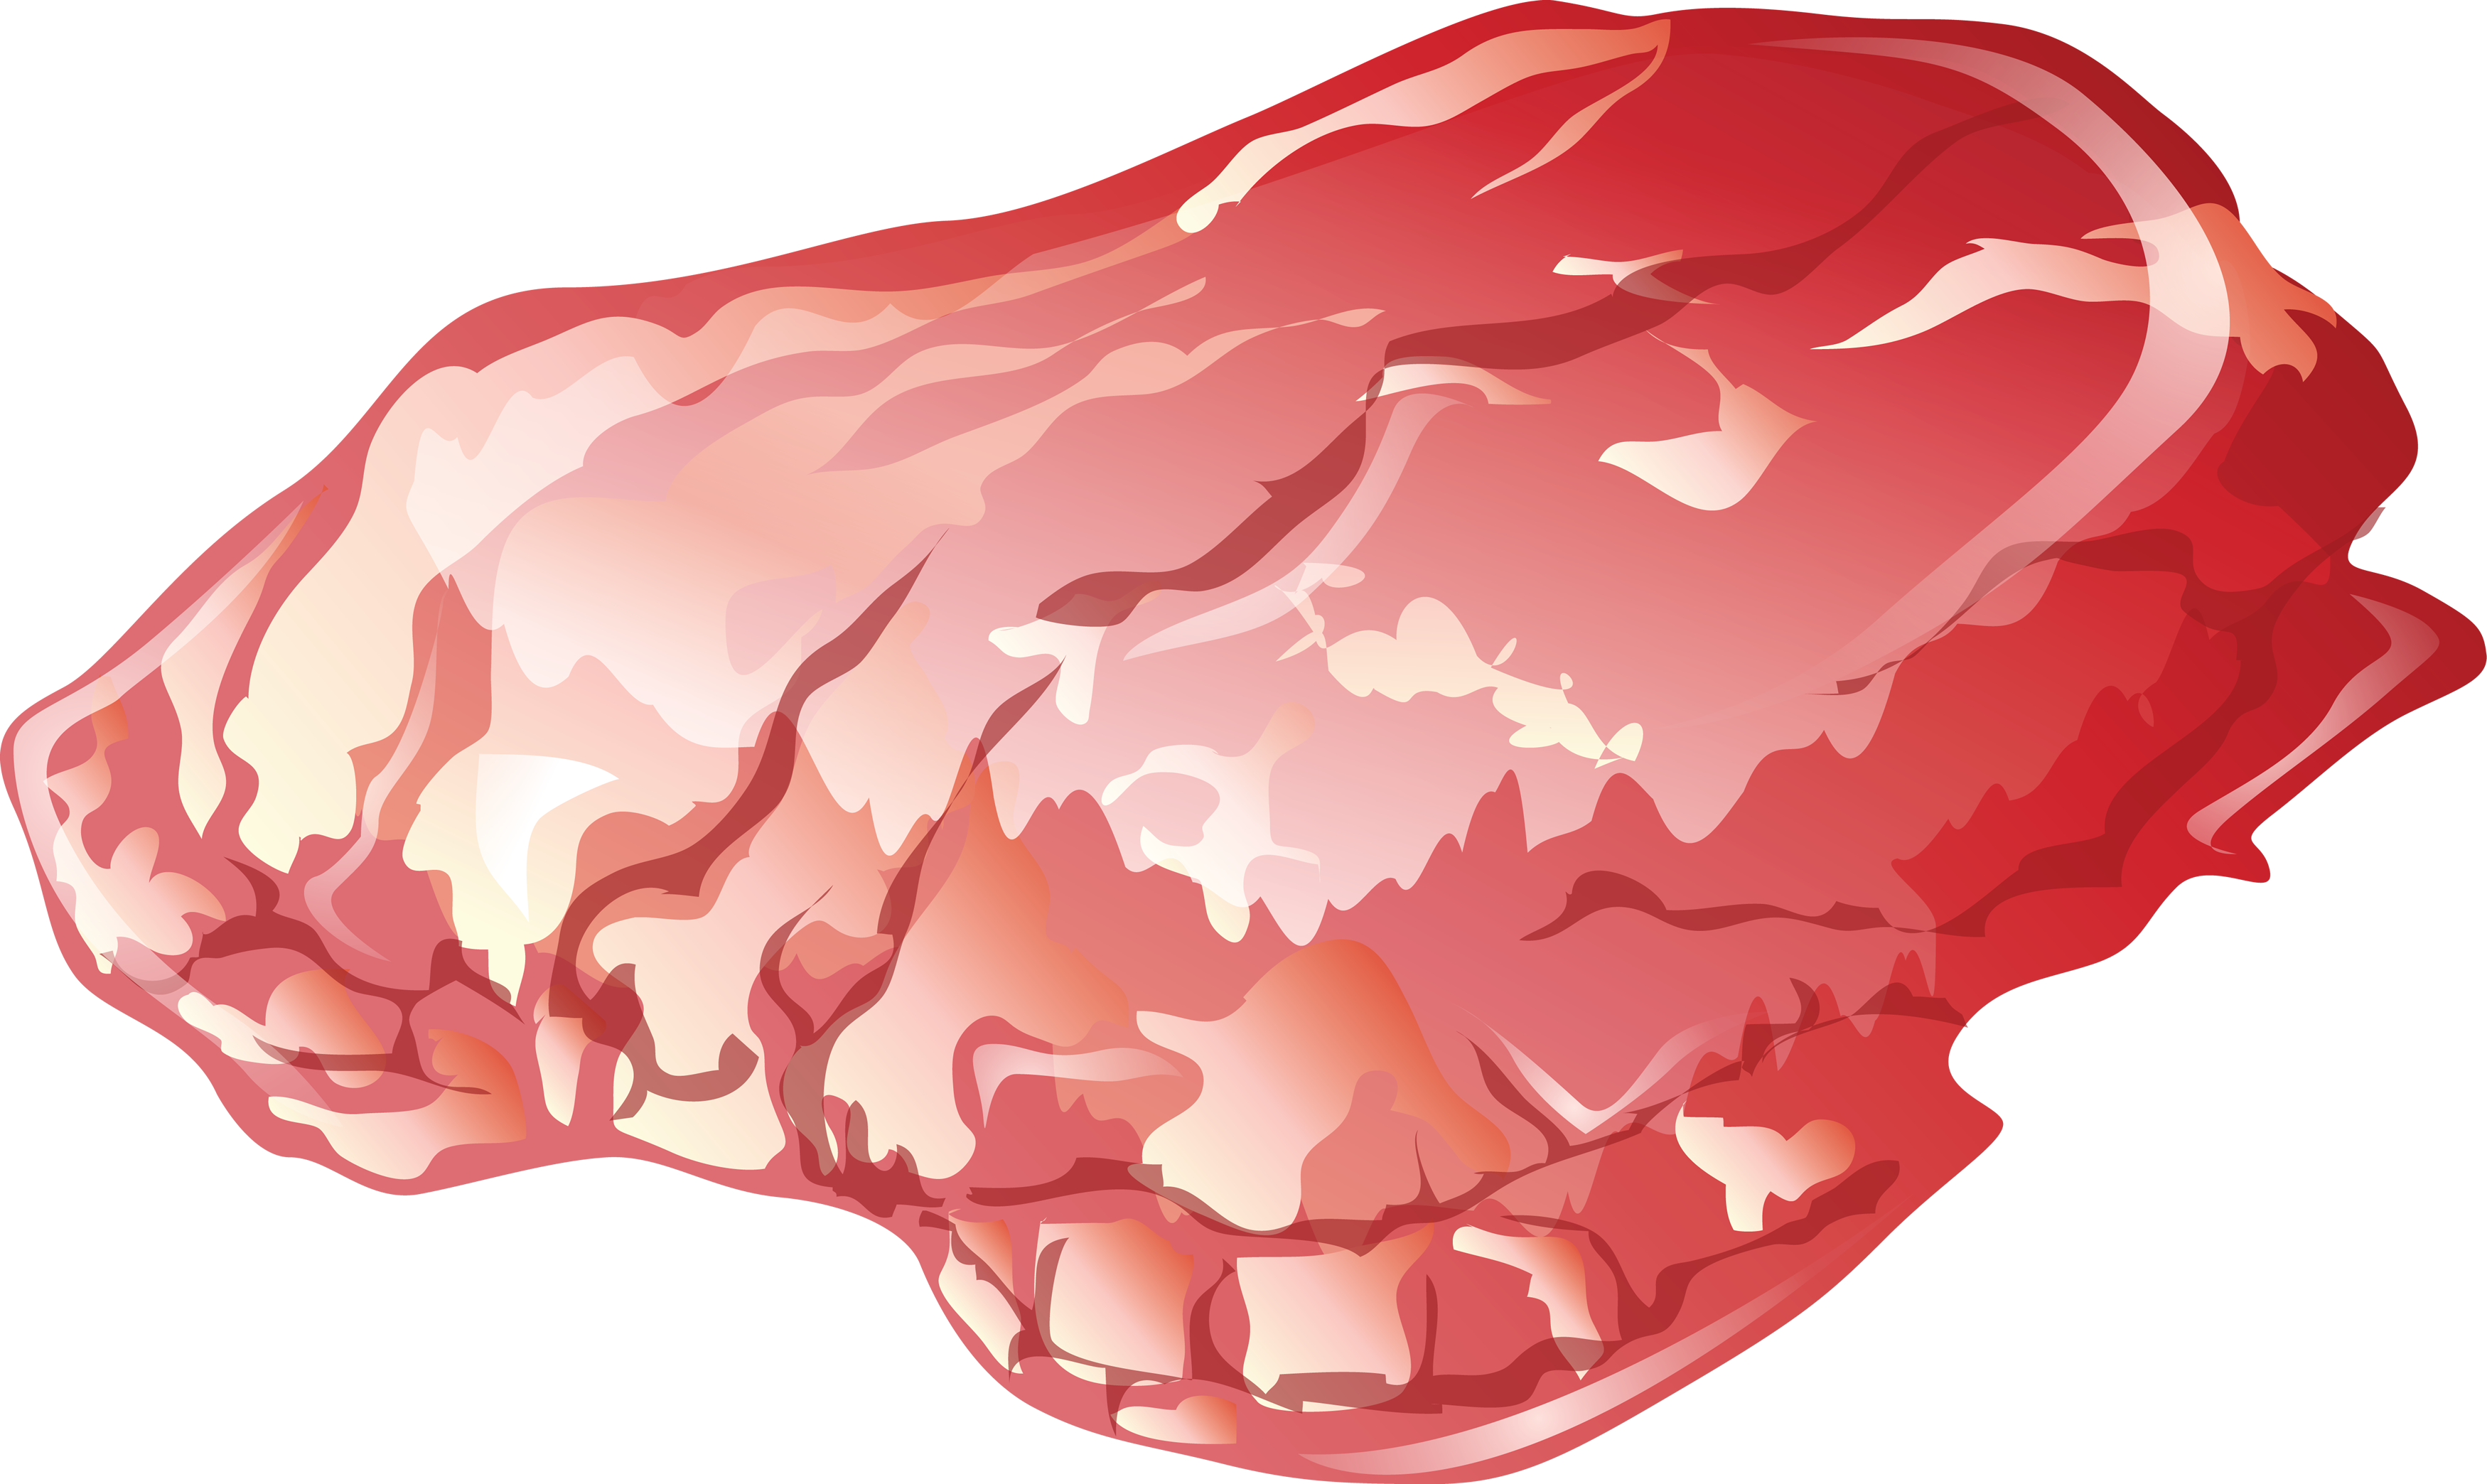 Png image free download. Beef clipart meat product